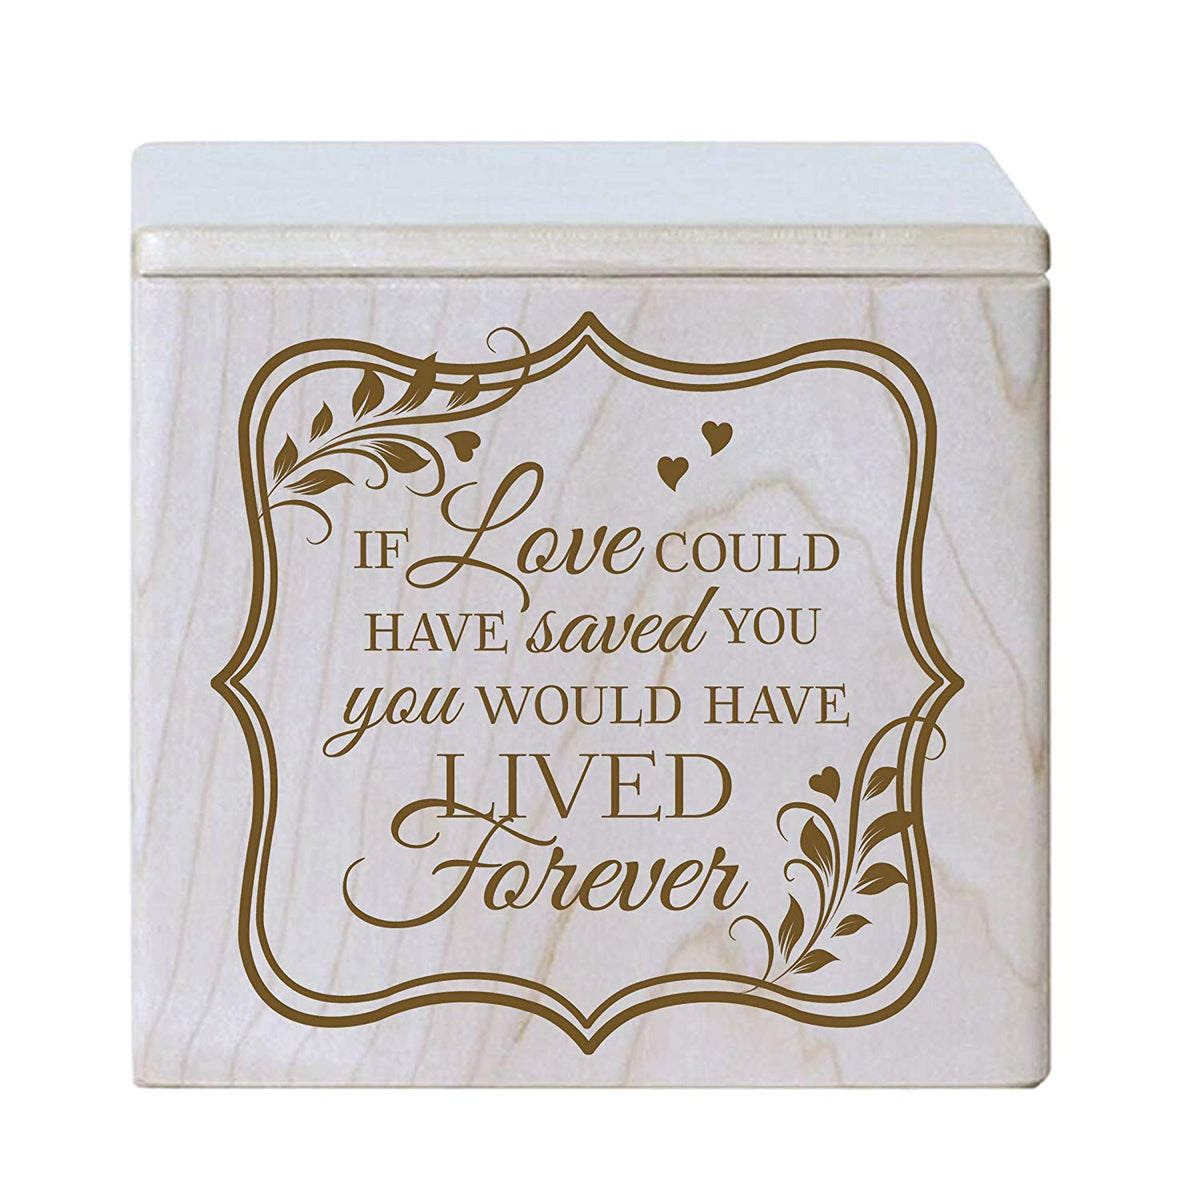 Small Adult Cremation Urn - If Love Could